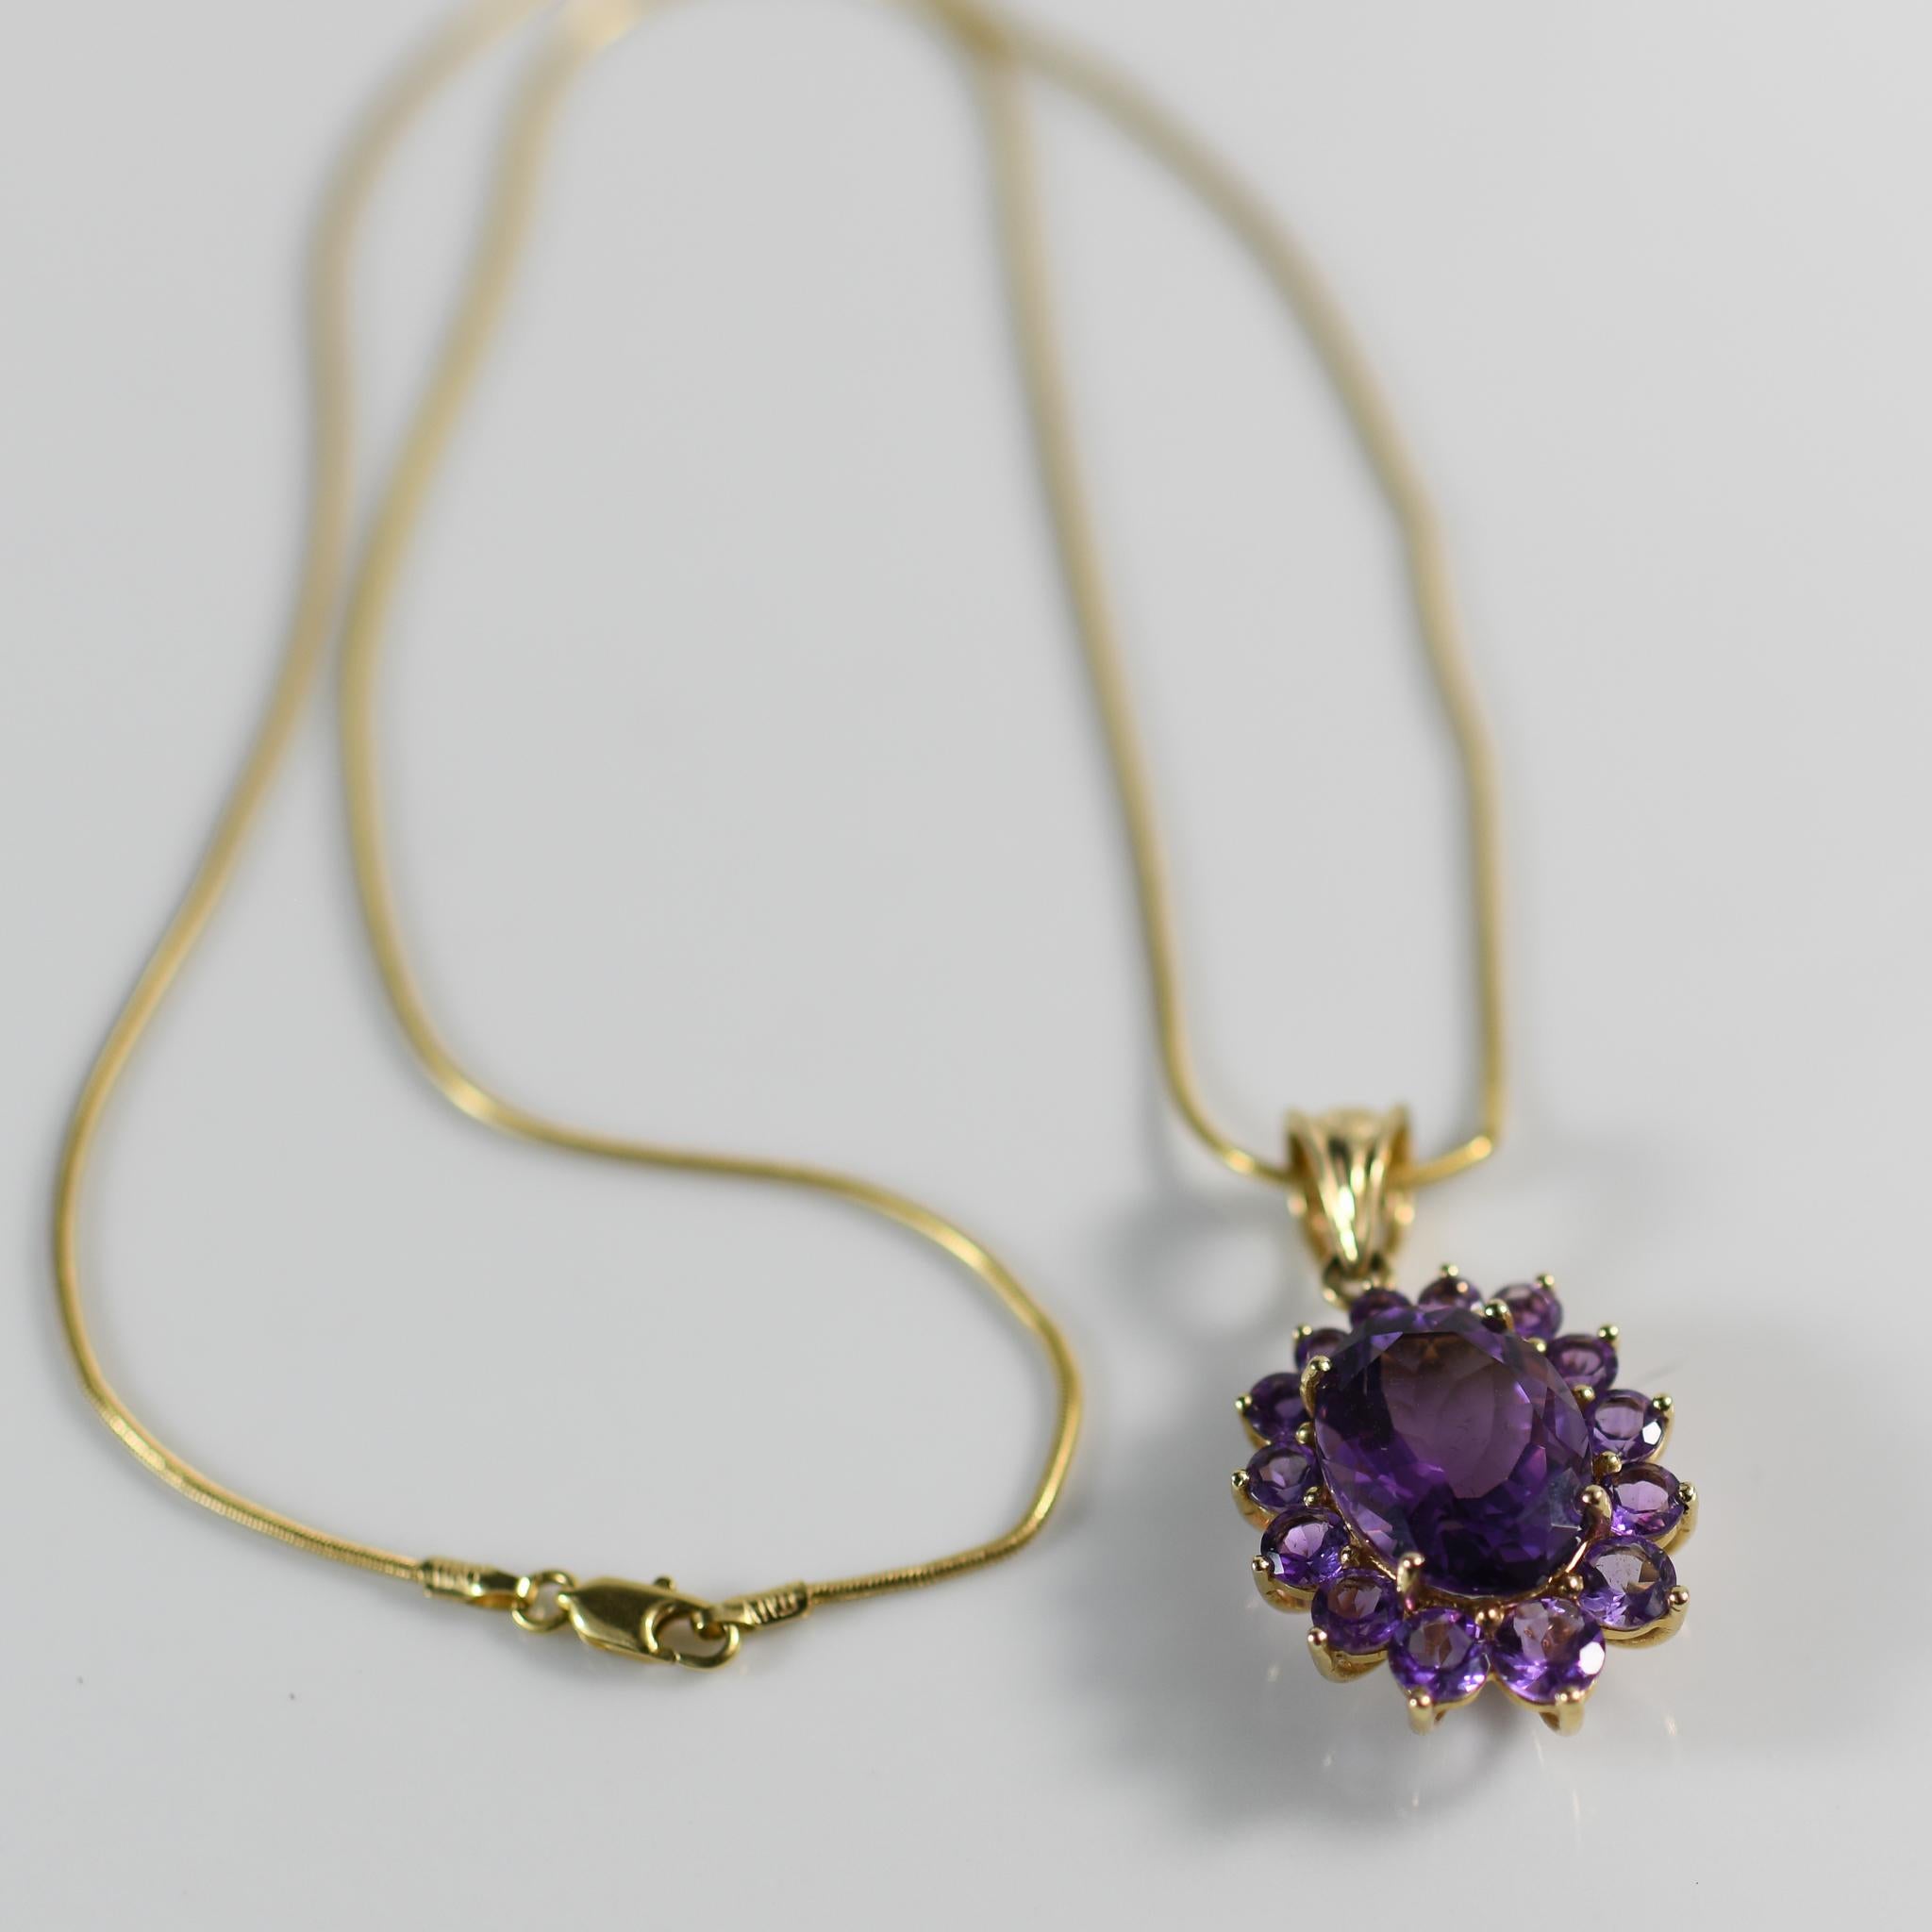 Oval Amethyst Cluster Pendant w 14k Gold Snake Chain Necklace In Good Condition For Sale In Addison, TX